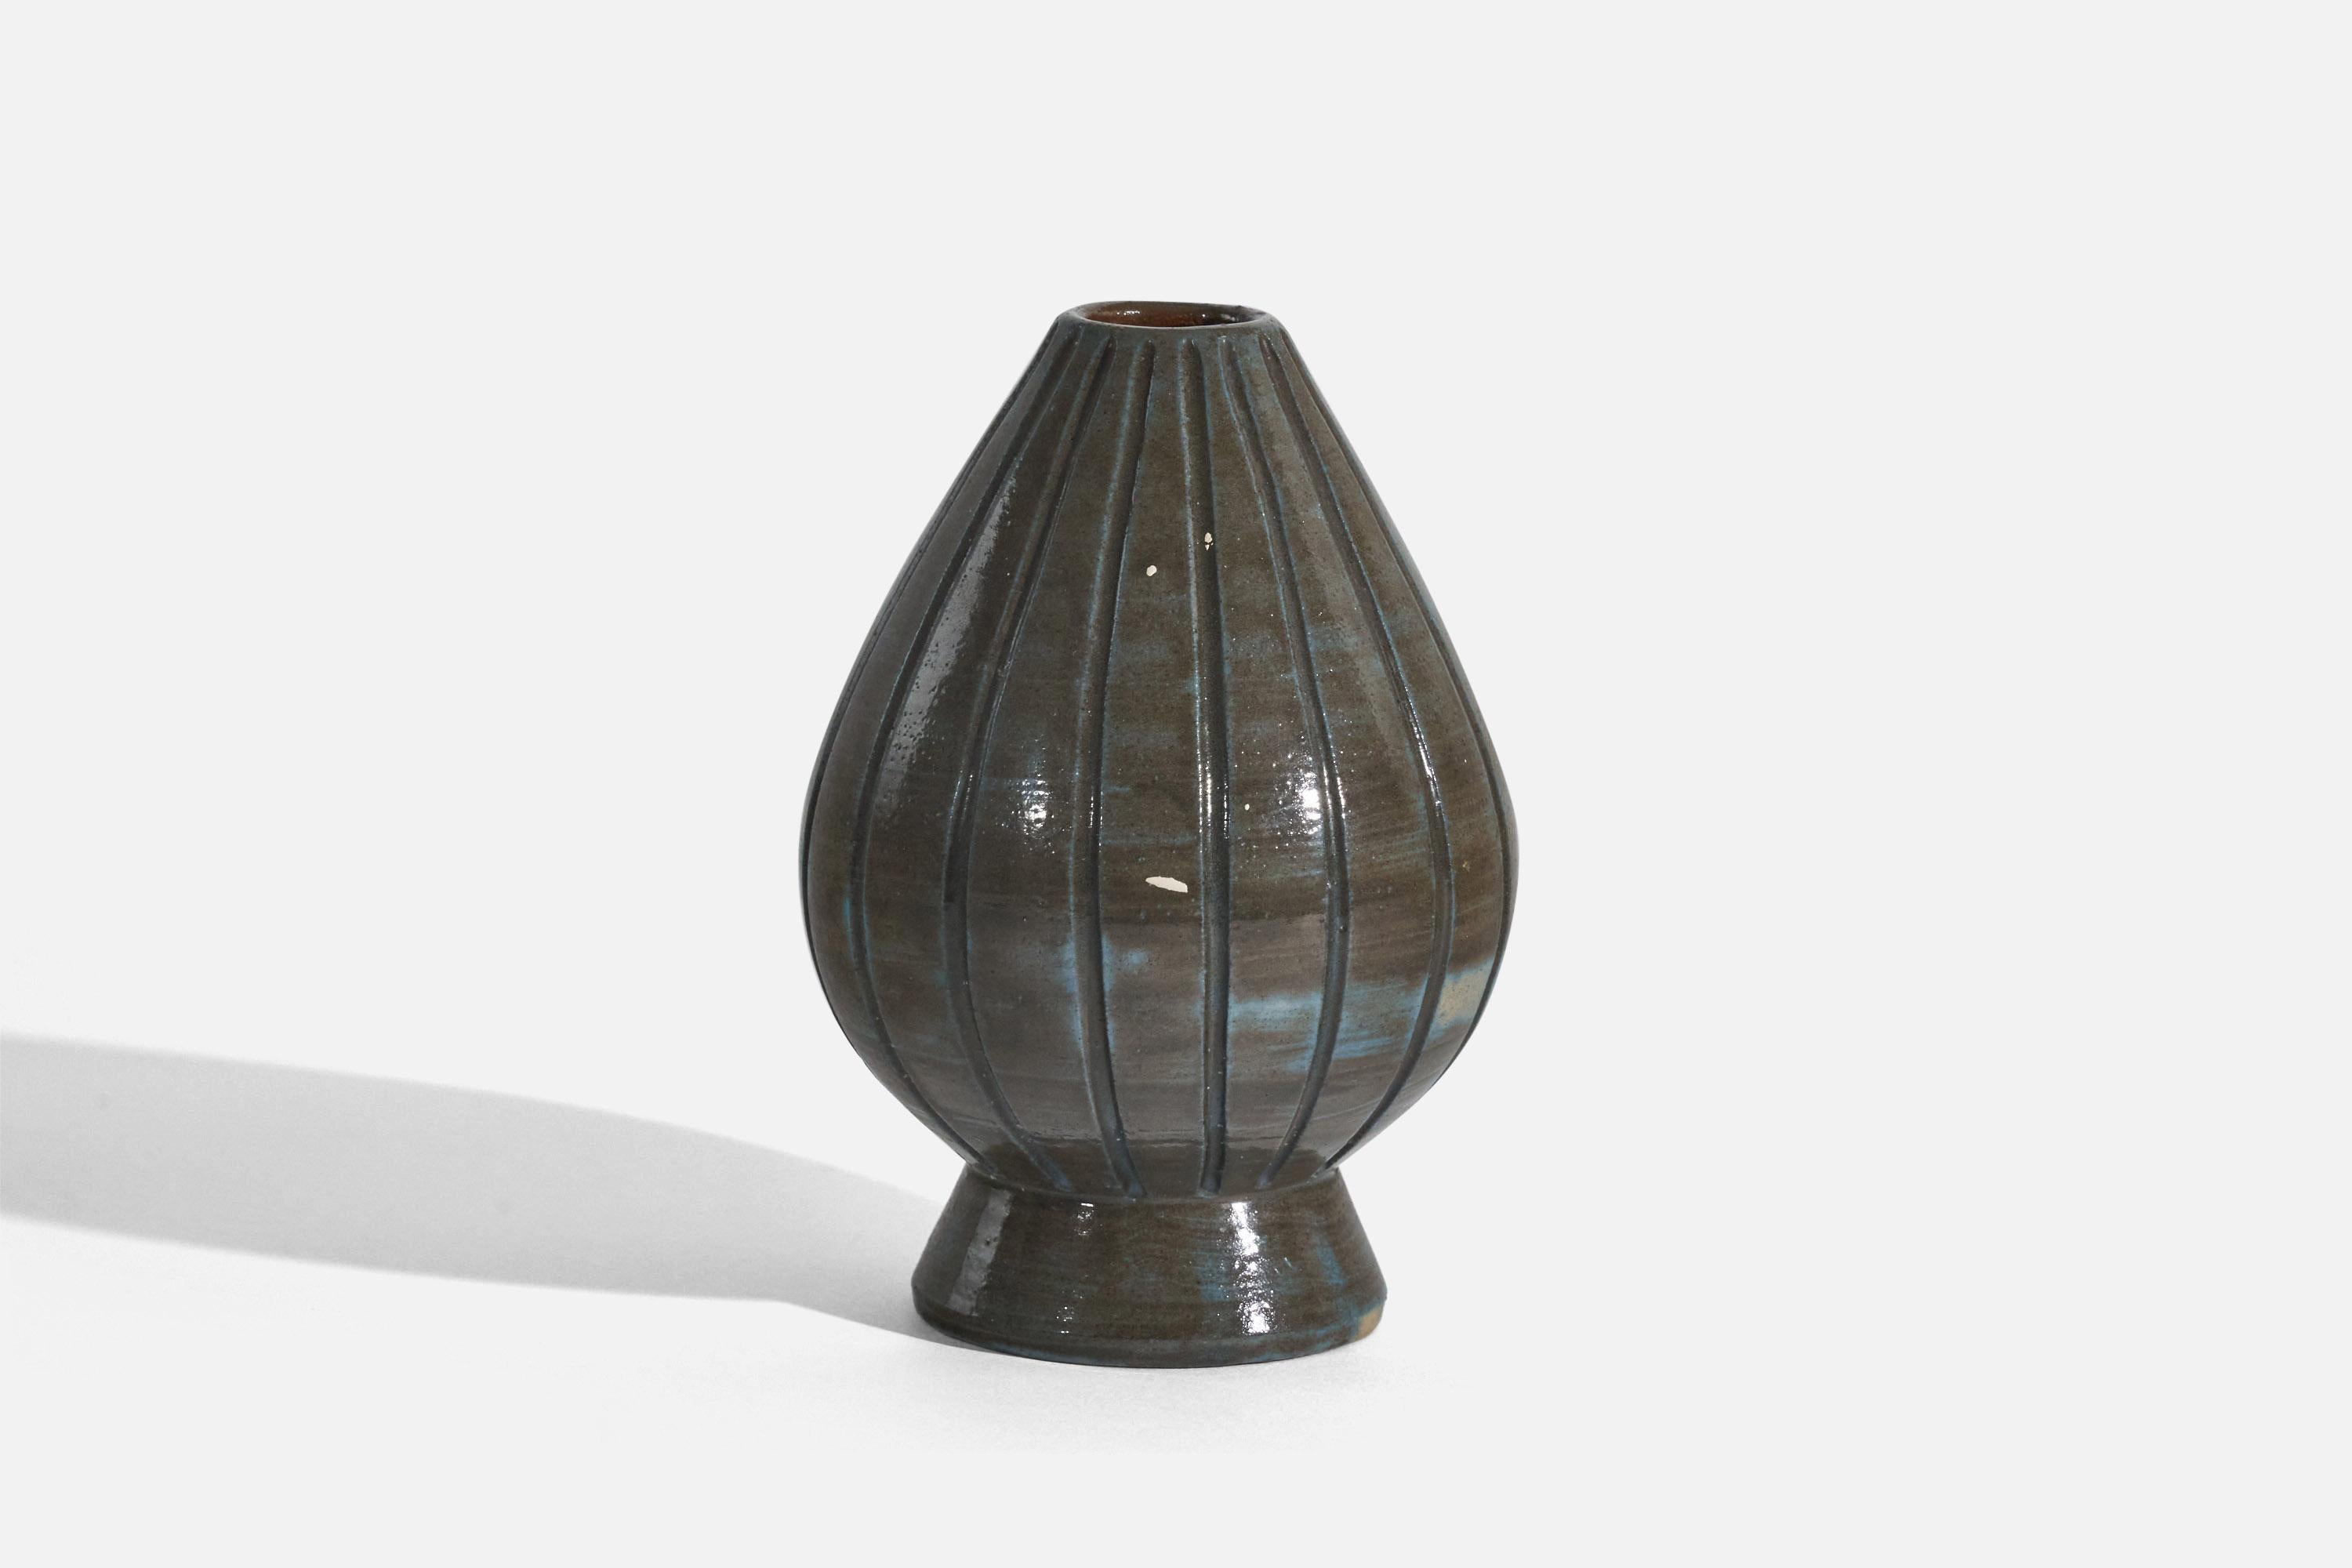 A brown and blue glazed stoneware vase designed by Sven Bolin and produced by Höganäs, Sweden, circa 1960s.

